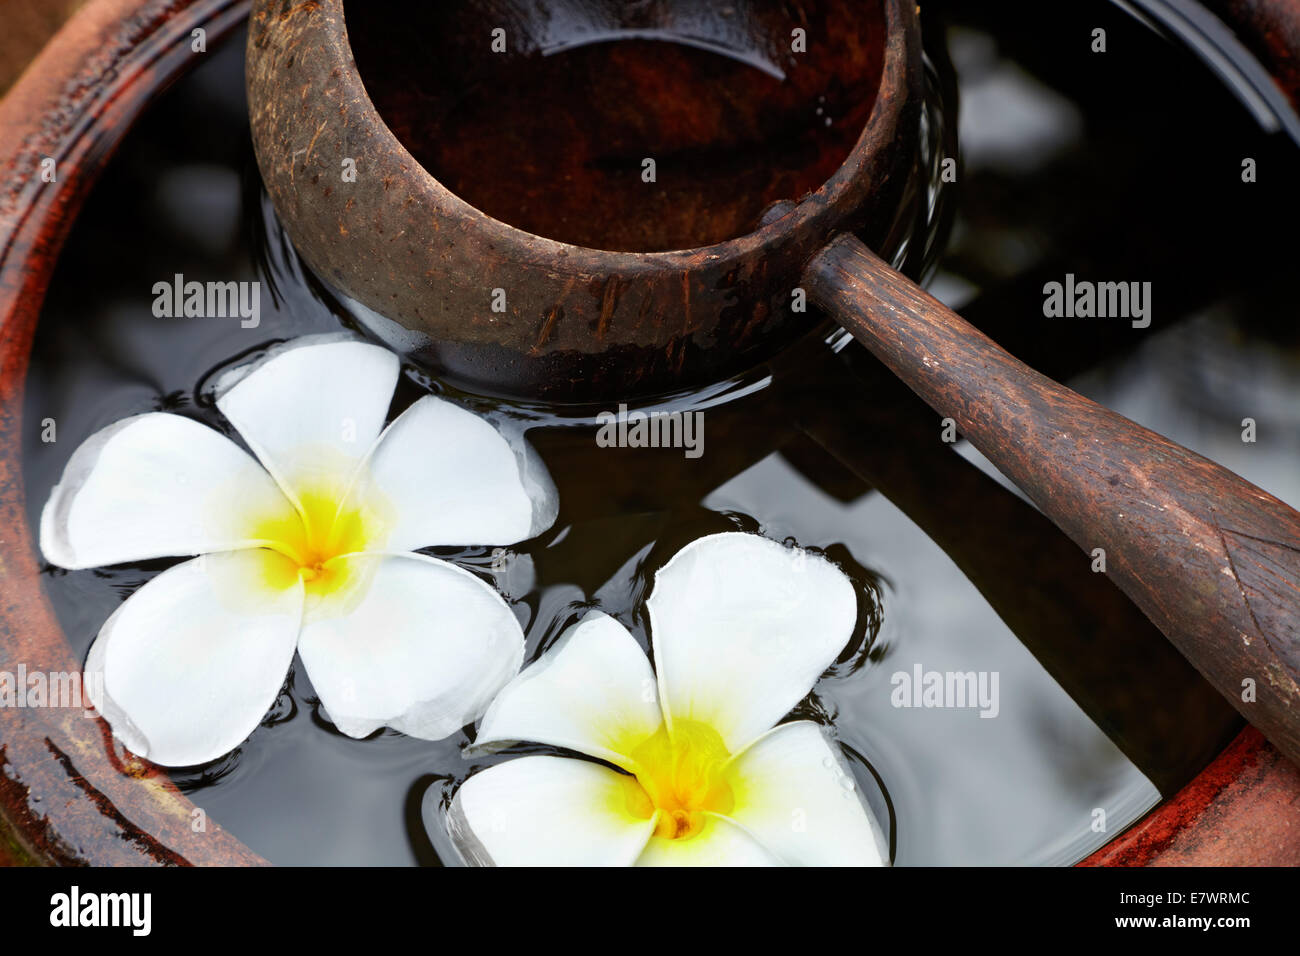 Water-filled ceramic pot with a wooden scoop and flowers Stock Photo